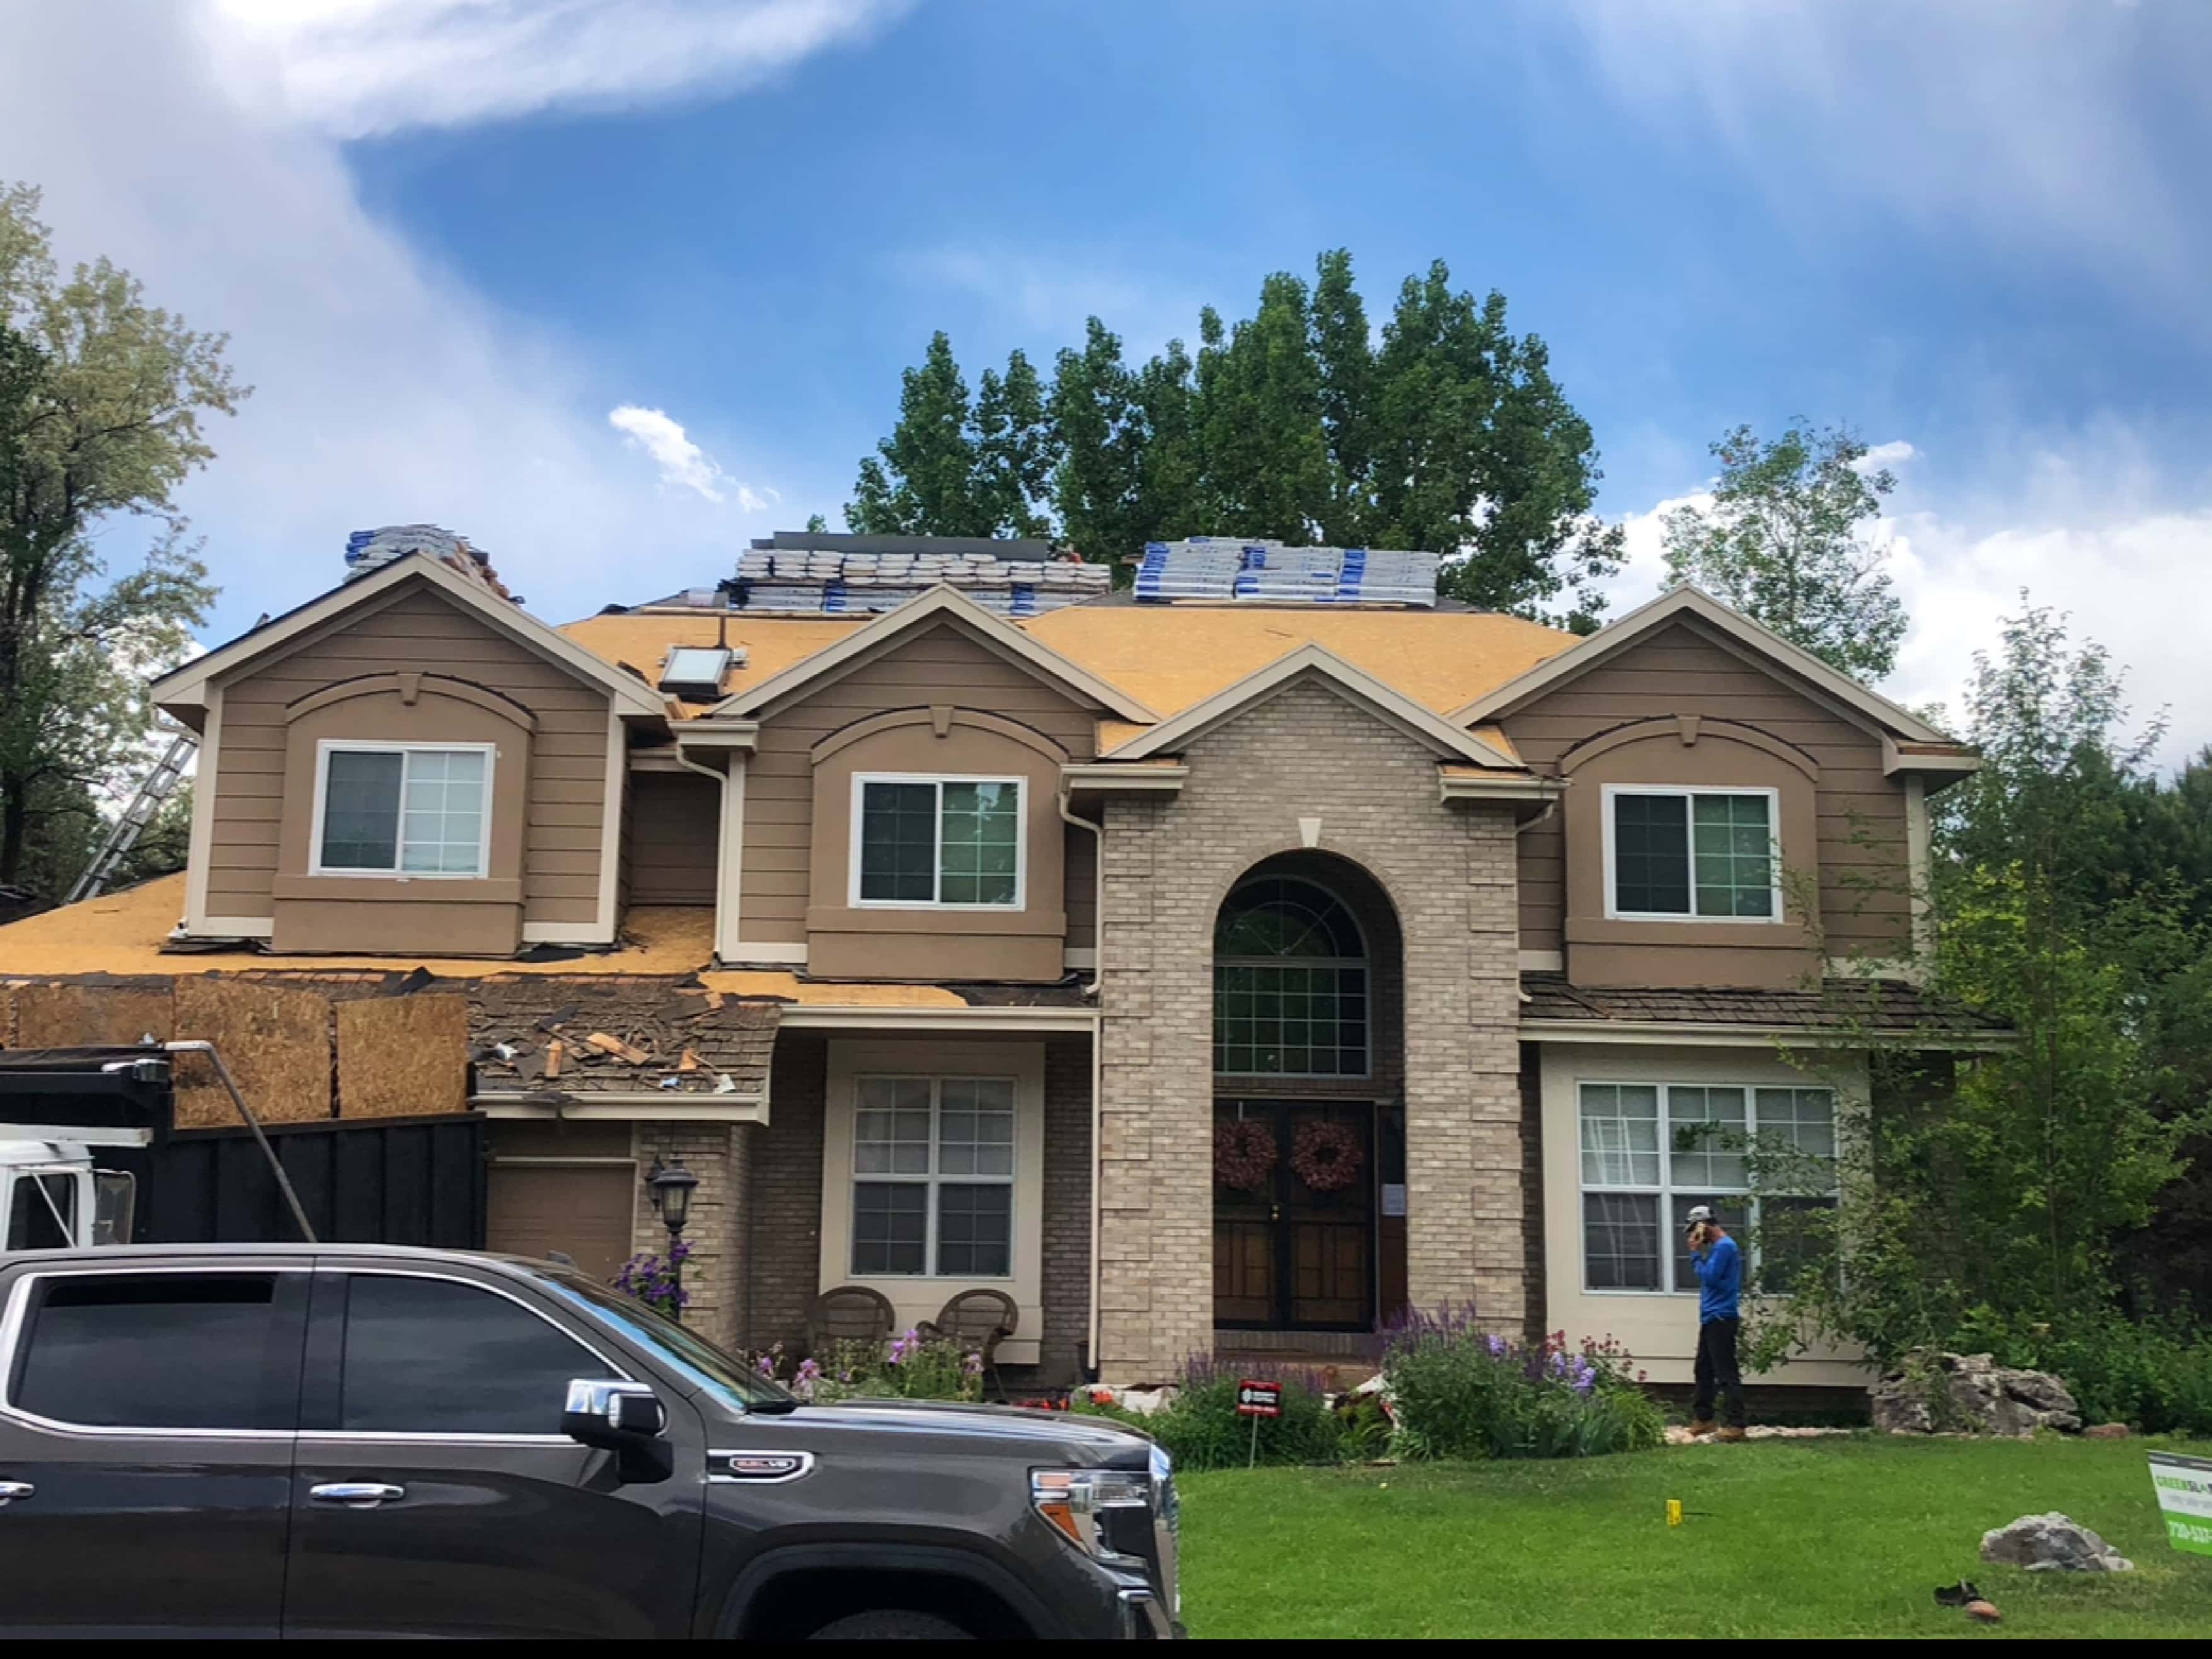 Greenslate Roofing & Siding - Lakewood, CO, US, roofing services near me